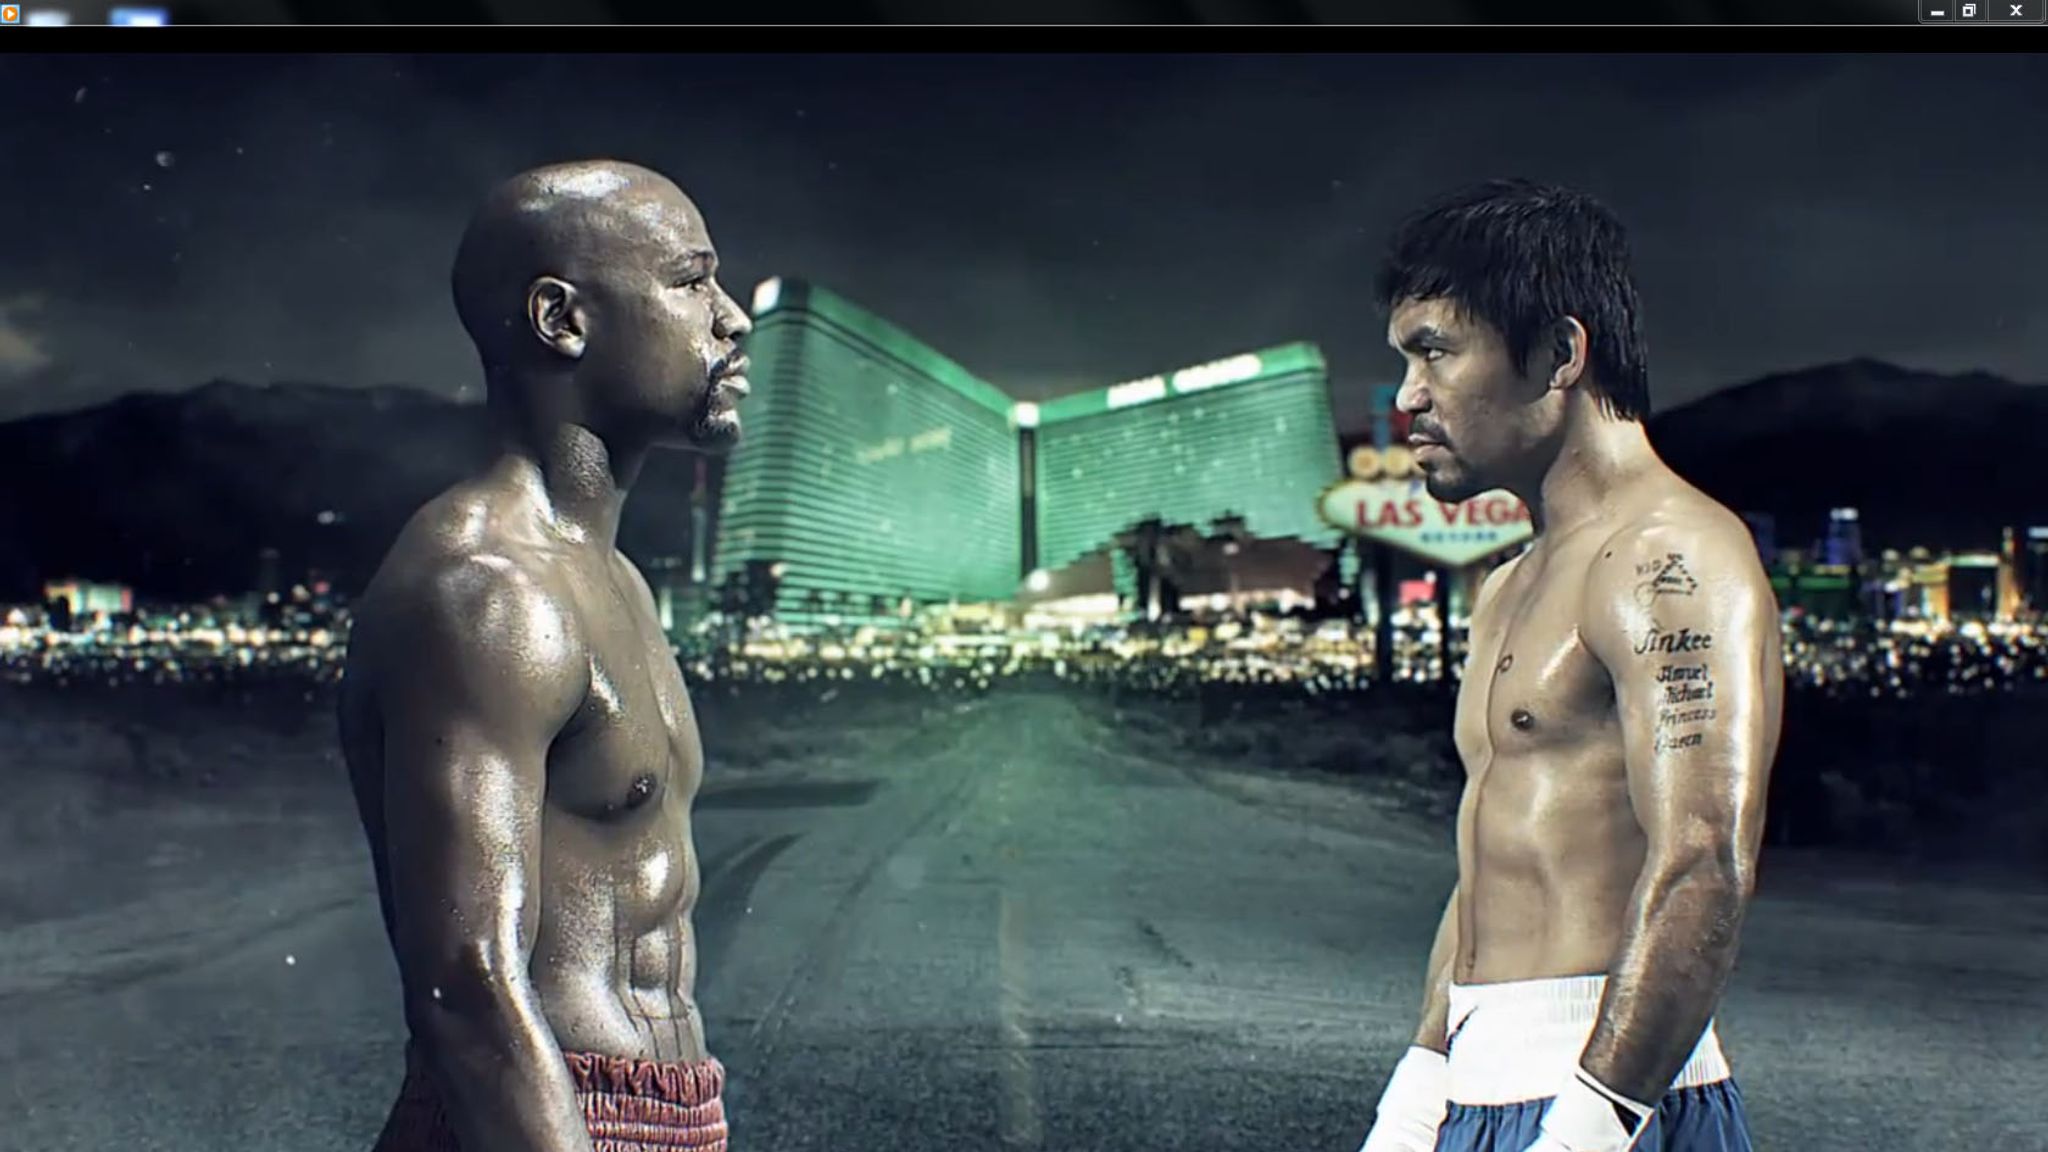 Floyd Mayweather takes on Manny Pacquiao in kandora style stakes during  Dubai trip